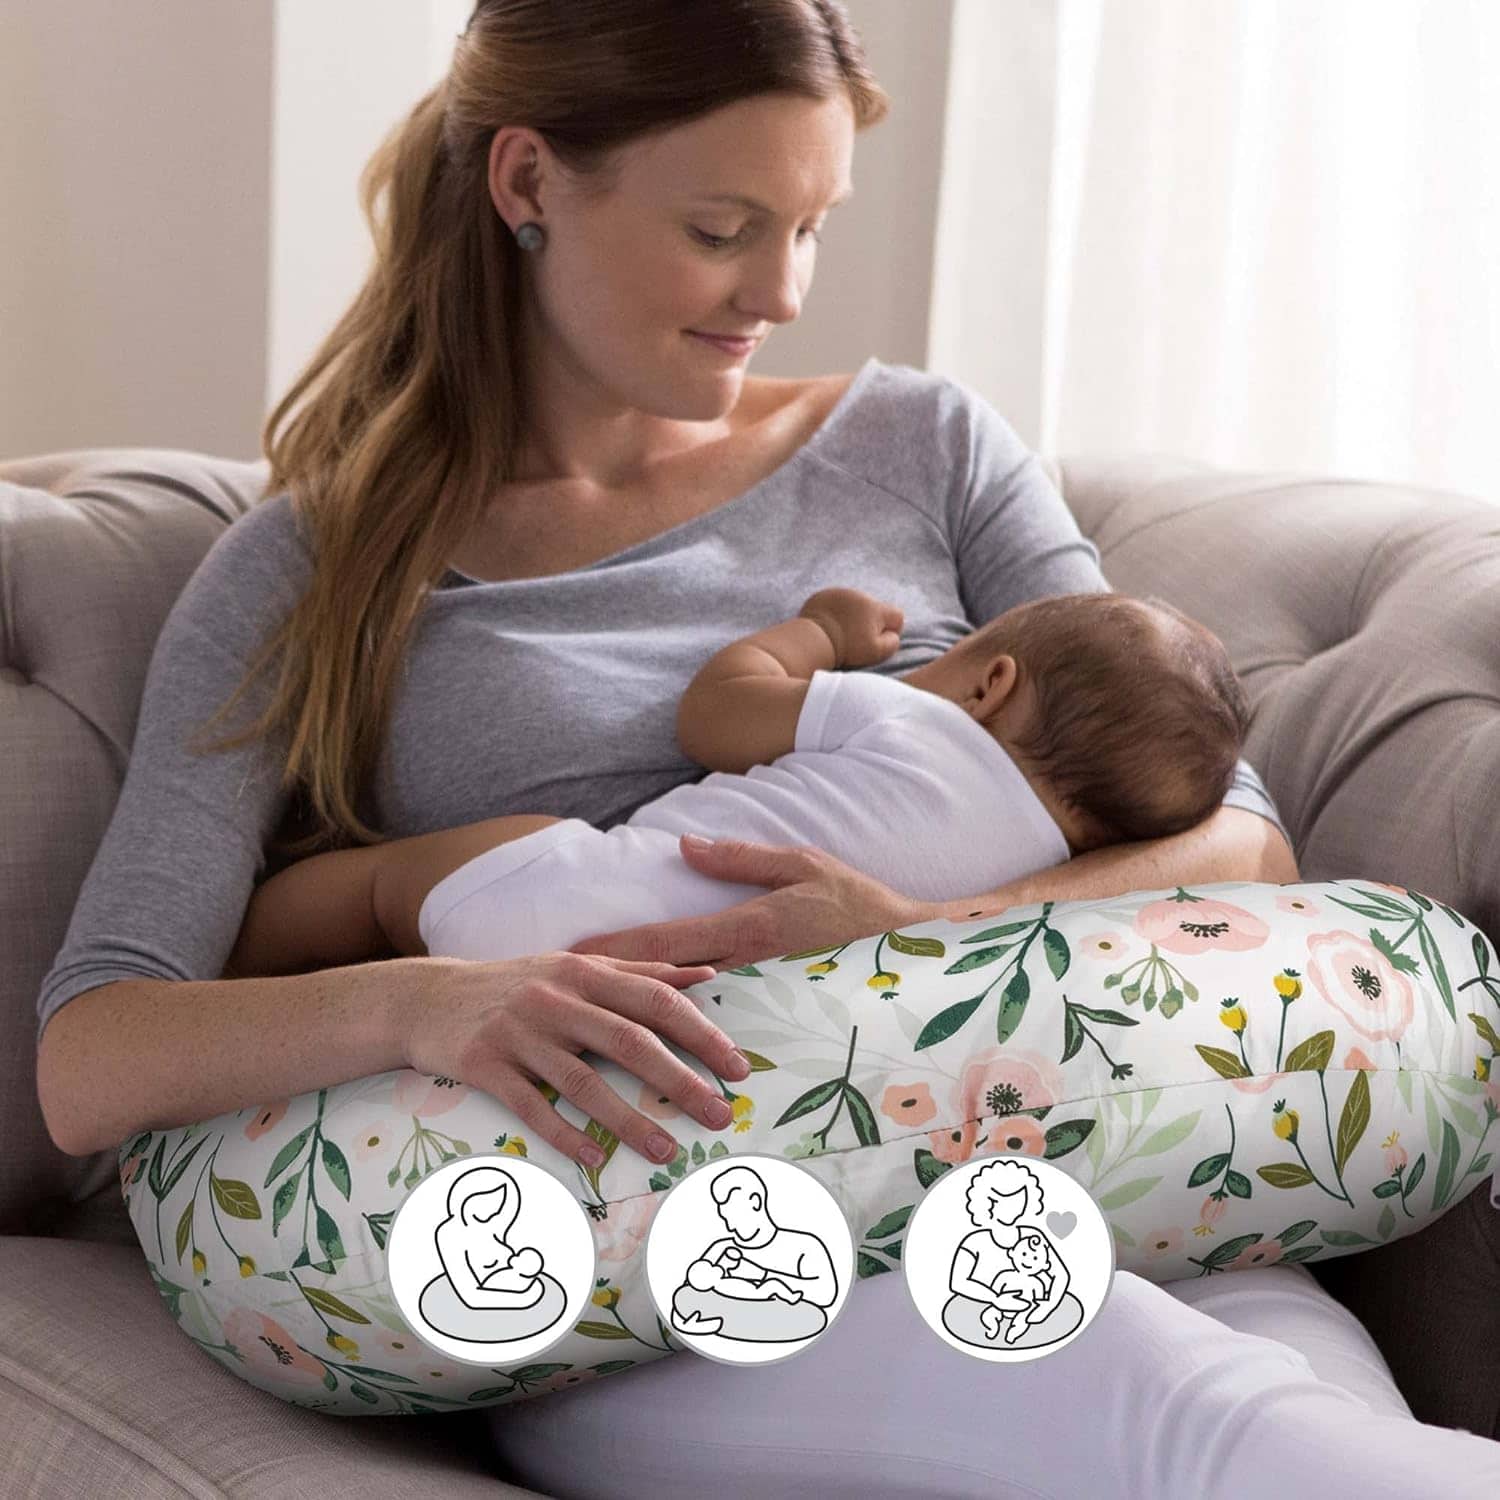 Mom using a breastfeeding pillow while she is nursing her baby